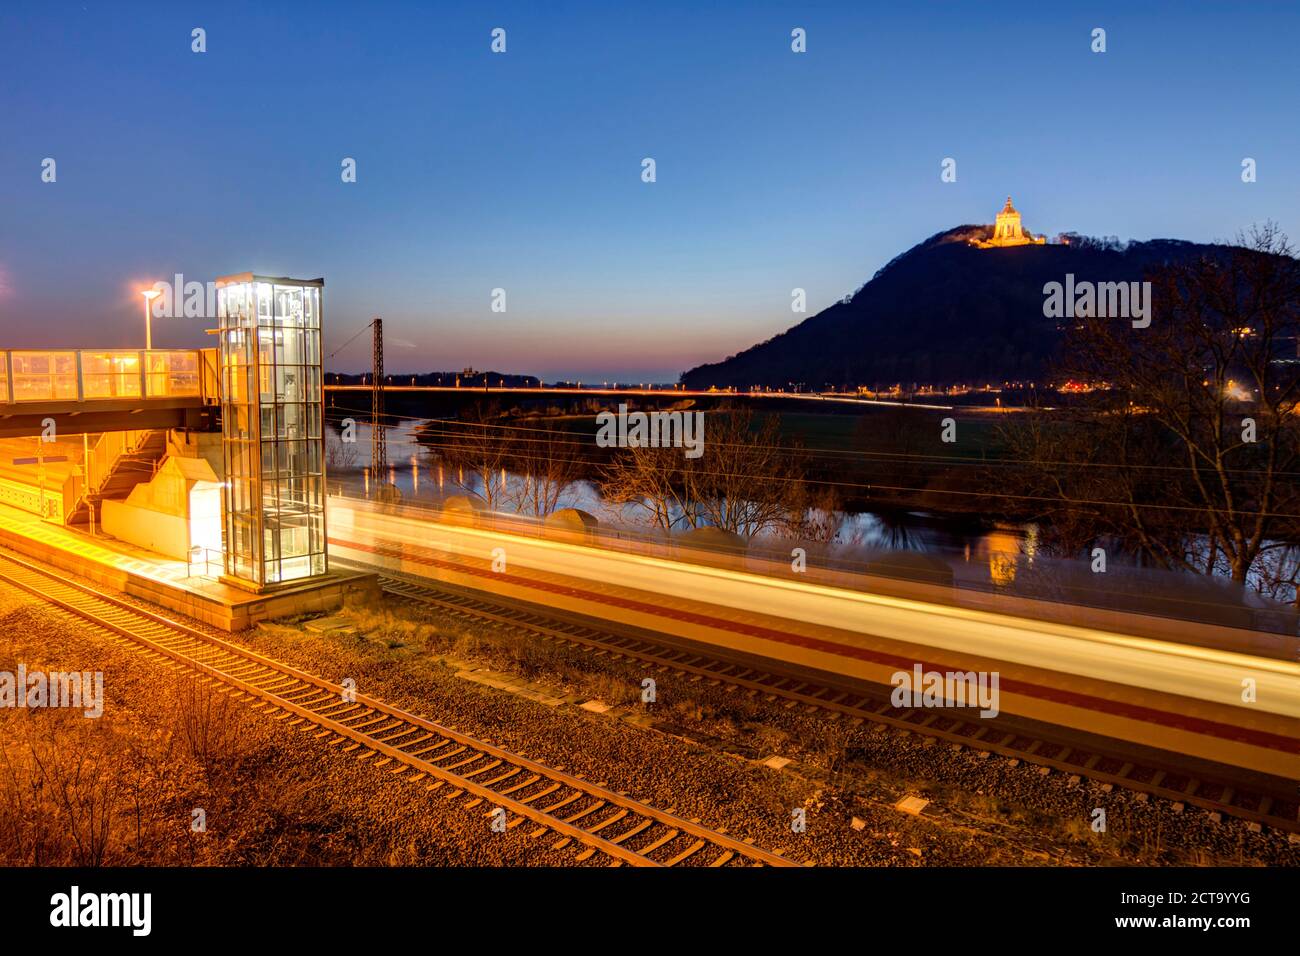 Germany, North Rhine-Westphalia, Porta Westfalica, lighted Emperor-Wilhelm monument at Wiehen hills with platform and railway tracks in front Stock Photo